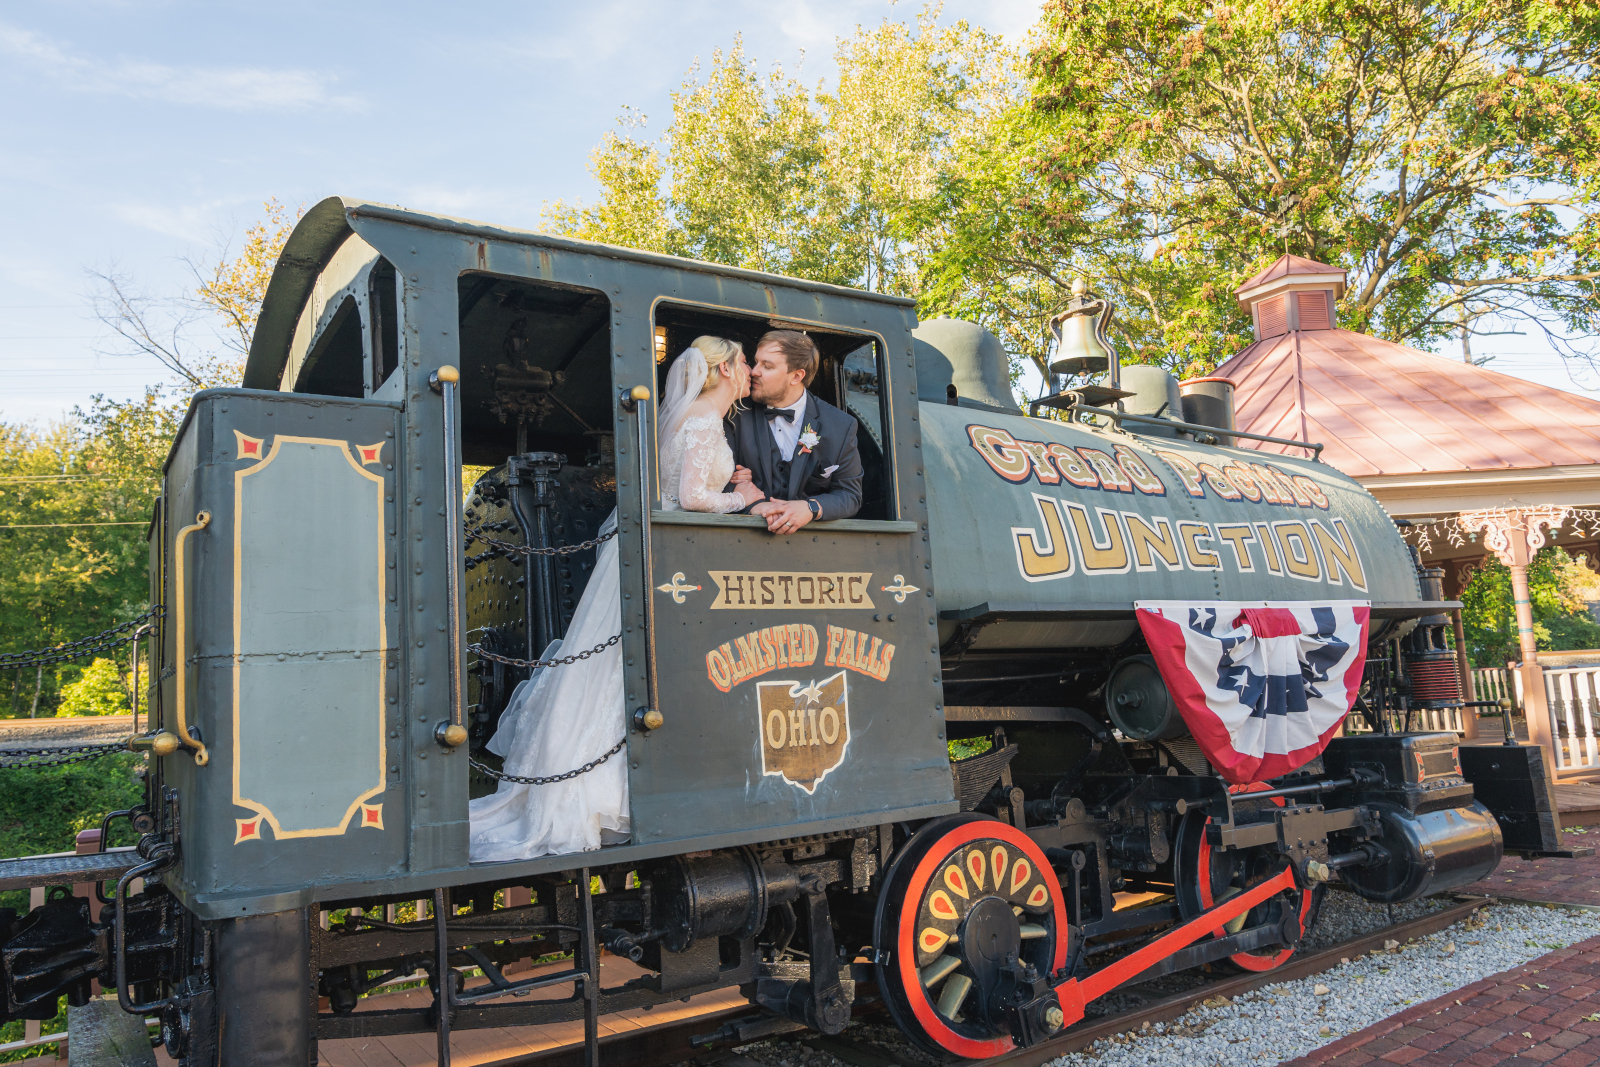 Bride and groom wedding portrait, train, unique wedding photo, cute, kiss, Historic Olmsted Falls Ohio, Grand Pacific Junction, fall wedding, cute outdoor wedding ceremony at Grand Pacific Wedding Gardens